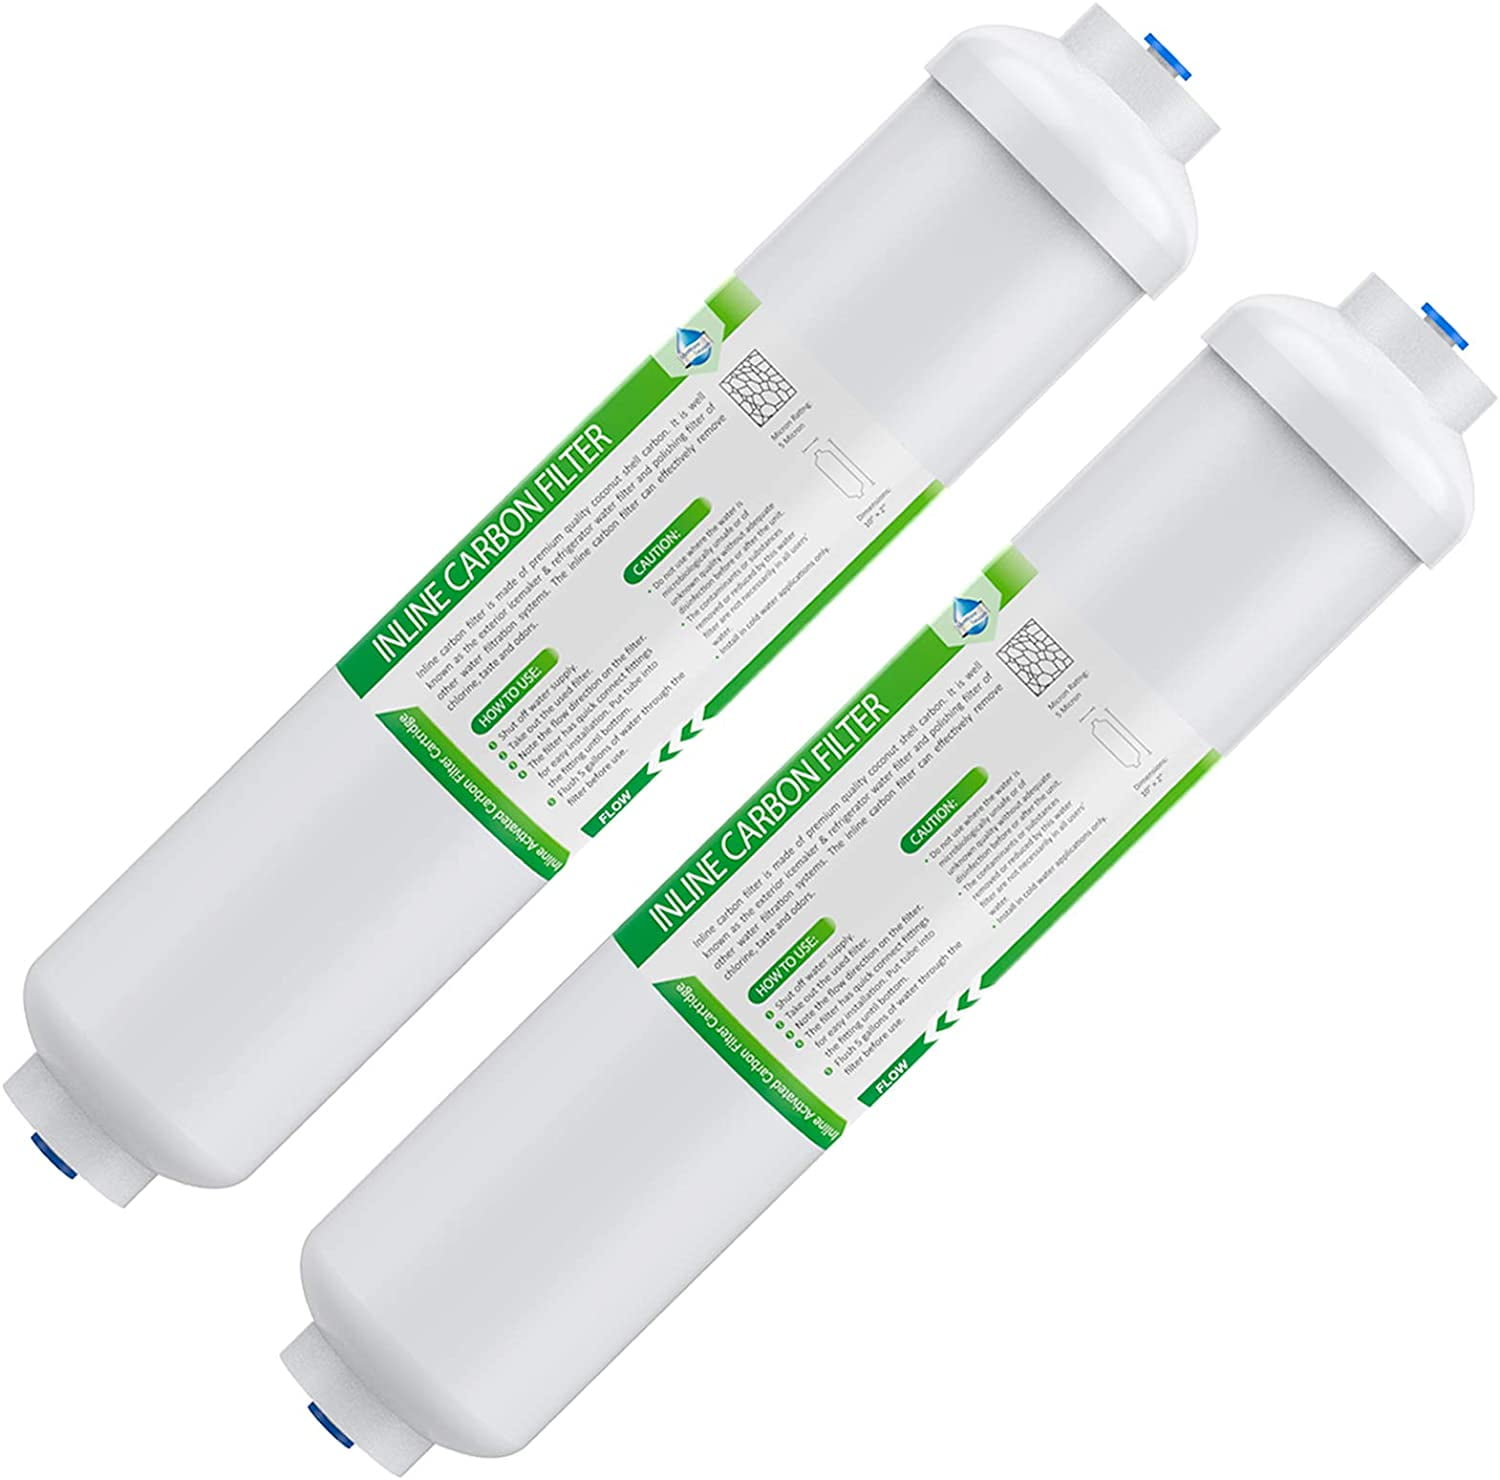 Inline Water Filter, Membrane Solutions 10 X 2 with 1/4 Quick-Connect  Water Filter Replacement Cartridge Inline Filter for Refrigerator, Ice  Maker